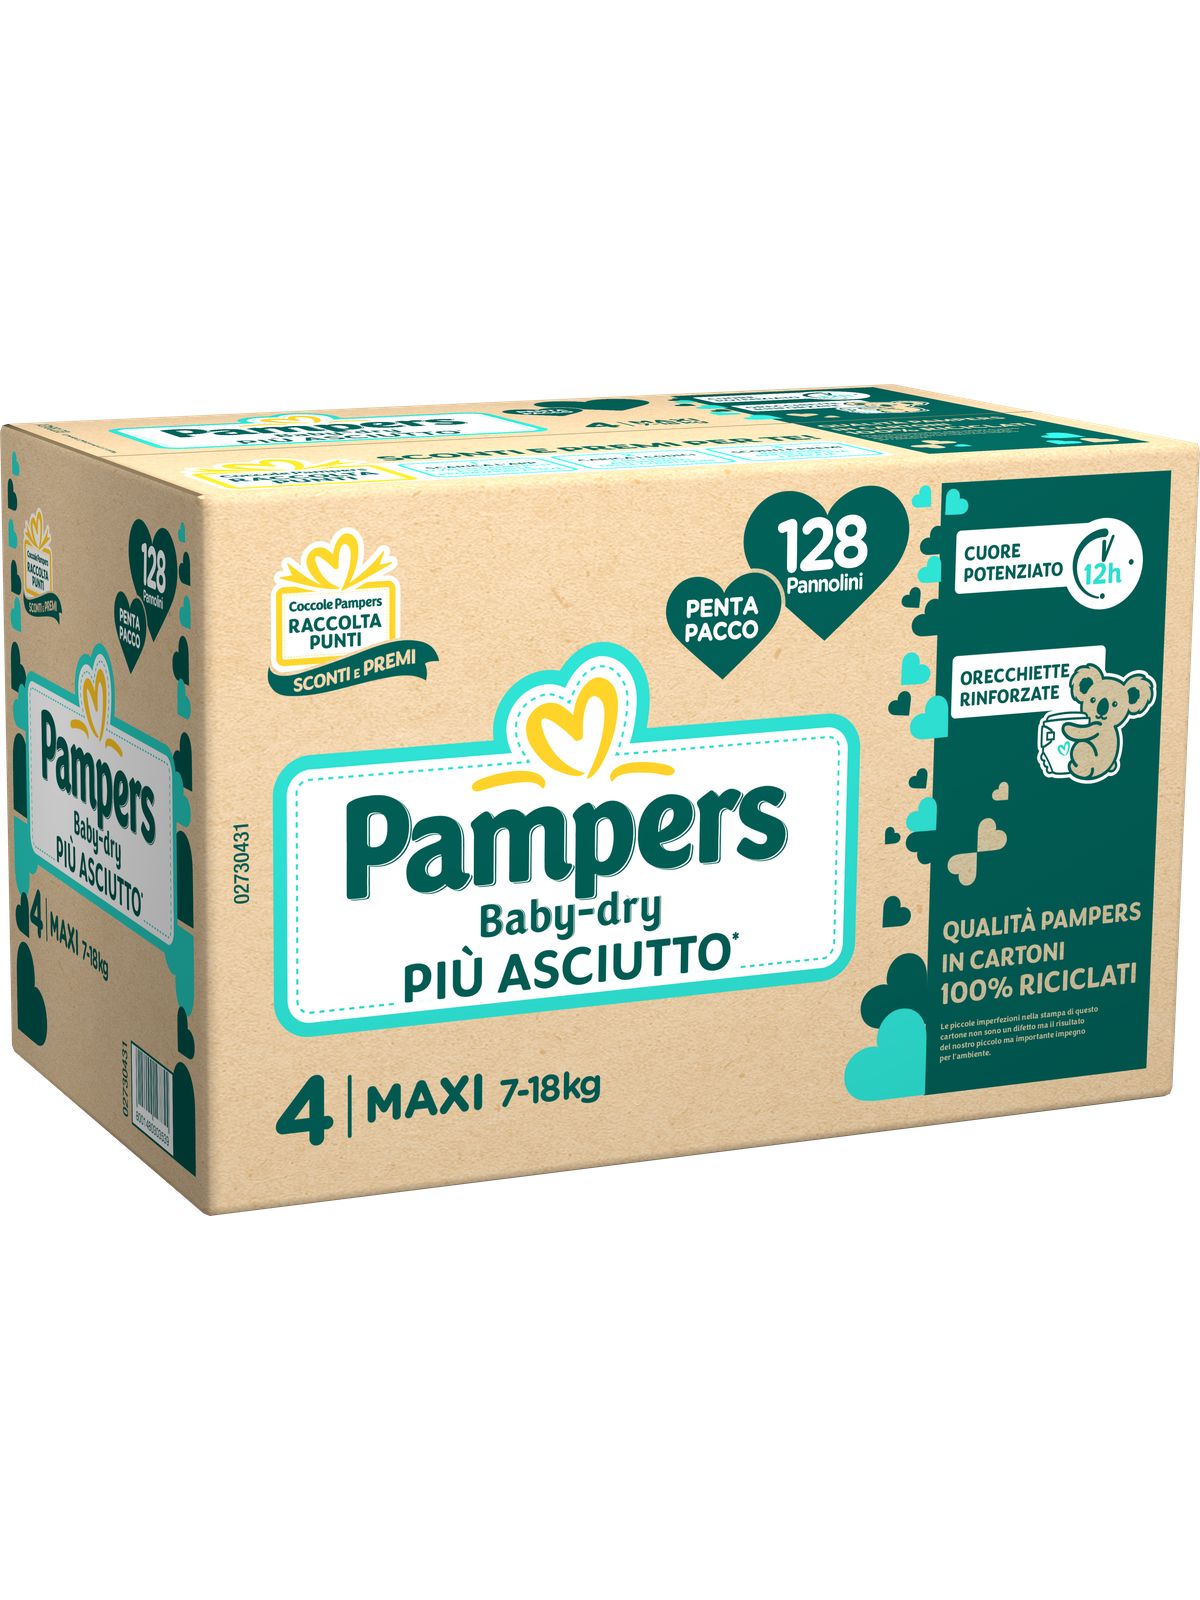 Pampers-penta baby dry  maxi x128